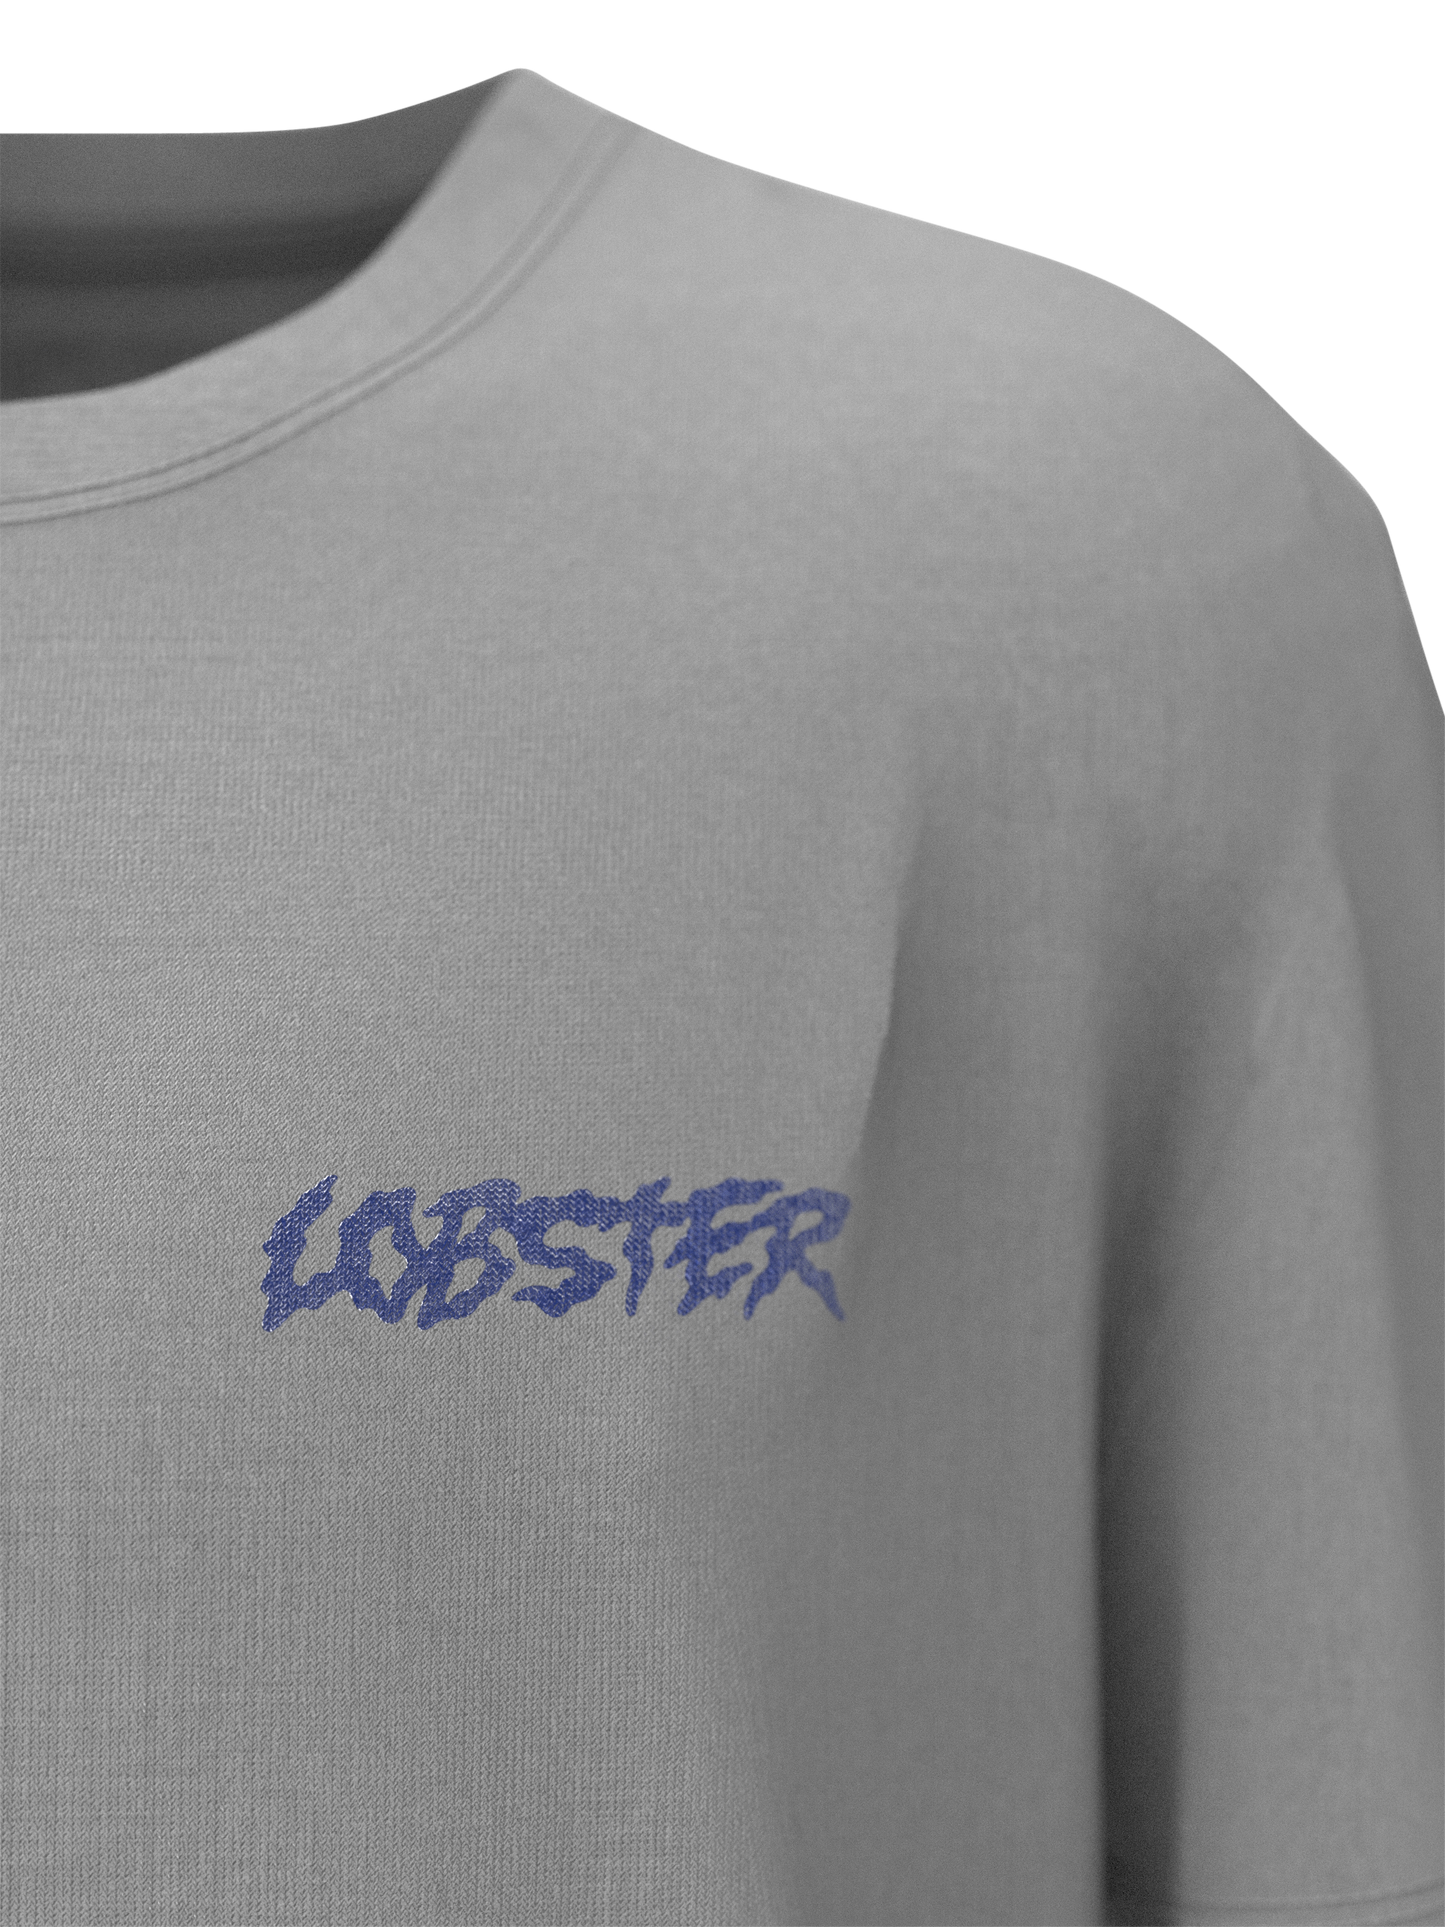 Lobster Snake T 2019 - 2020 product image by Lobster Snowboards